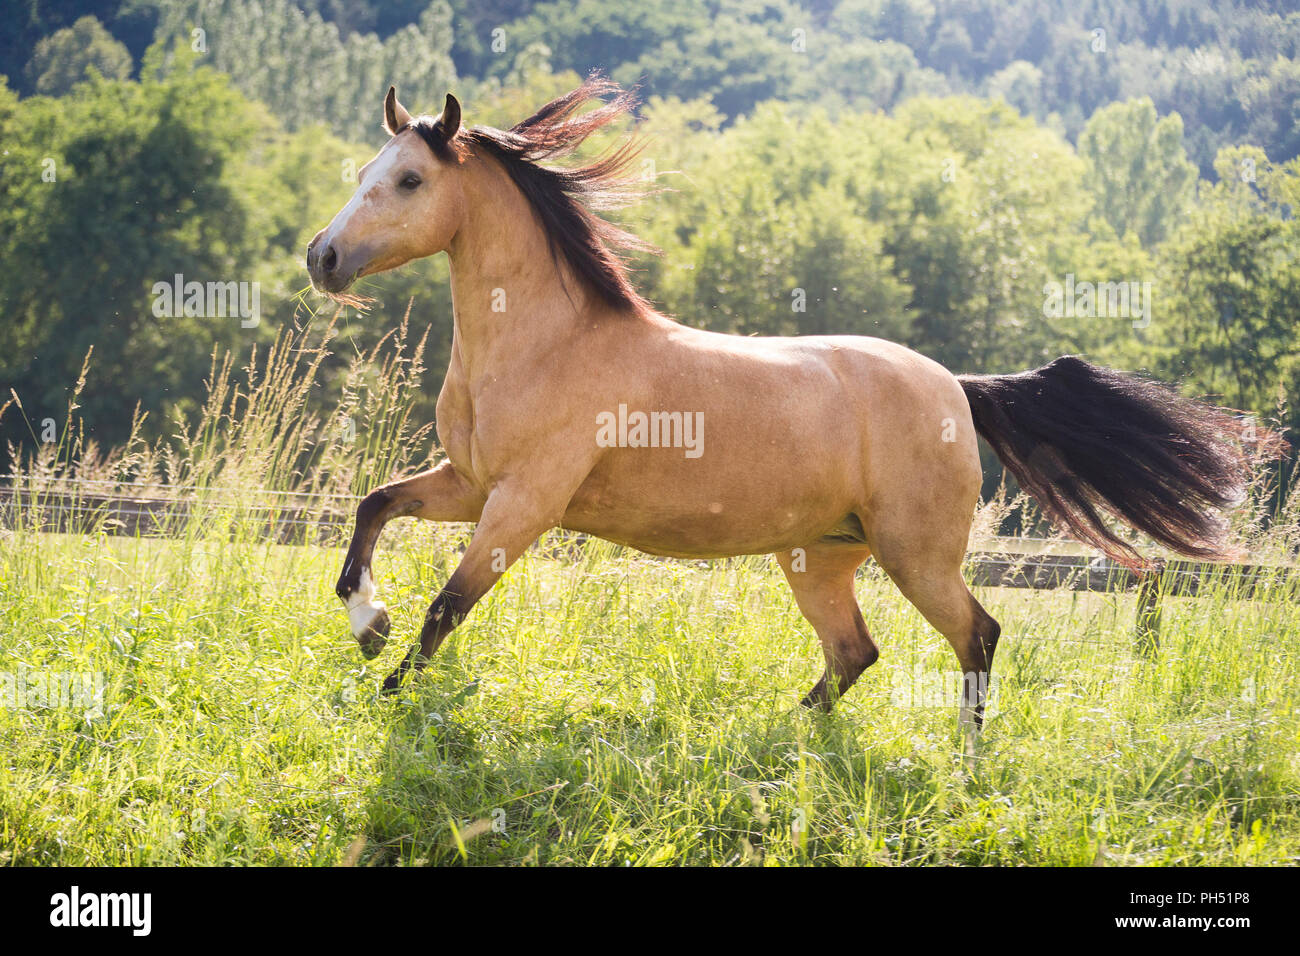 Welsh Cob (Section D). Dun mare galloping on a pasture. Austria Stock Photo